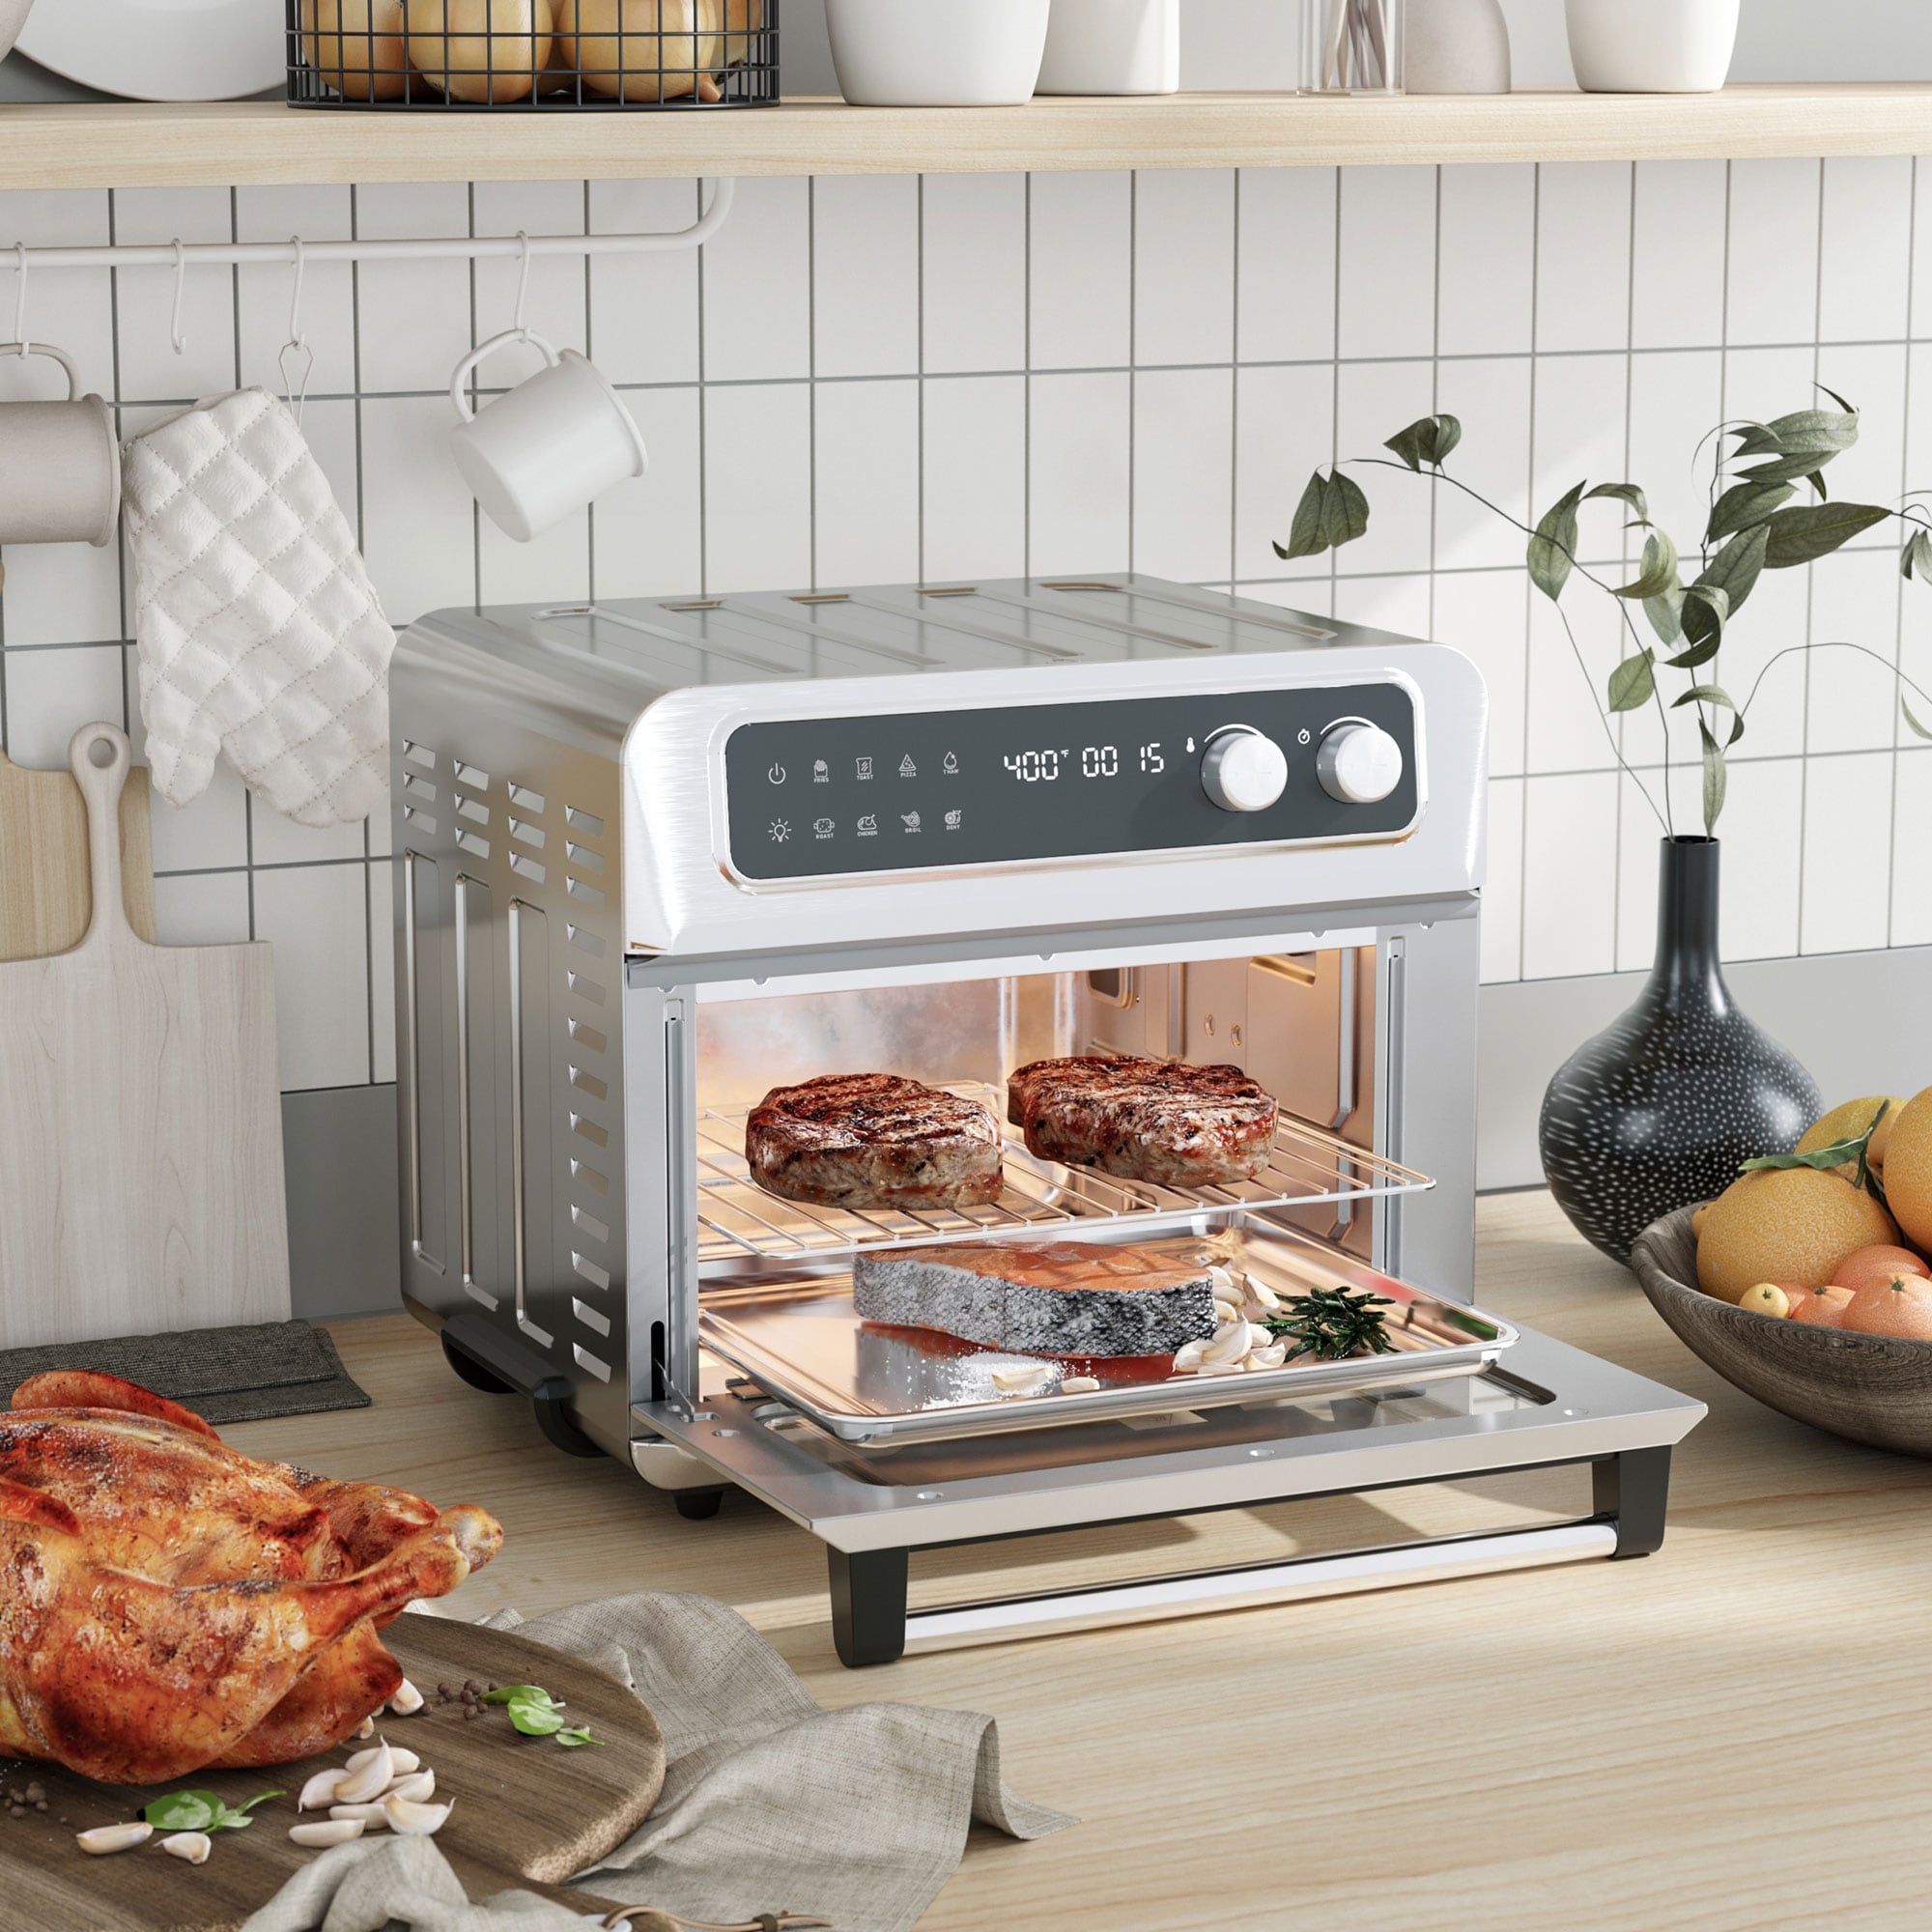 Calphalon Performance Air Fry Convection Oven, Countertop Toaster Oven,  Dark Stainless Steel 